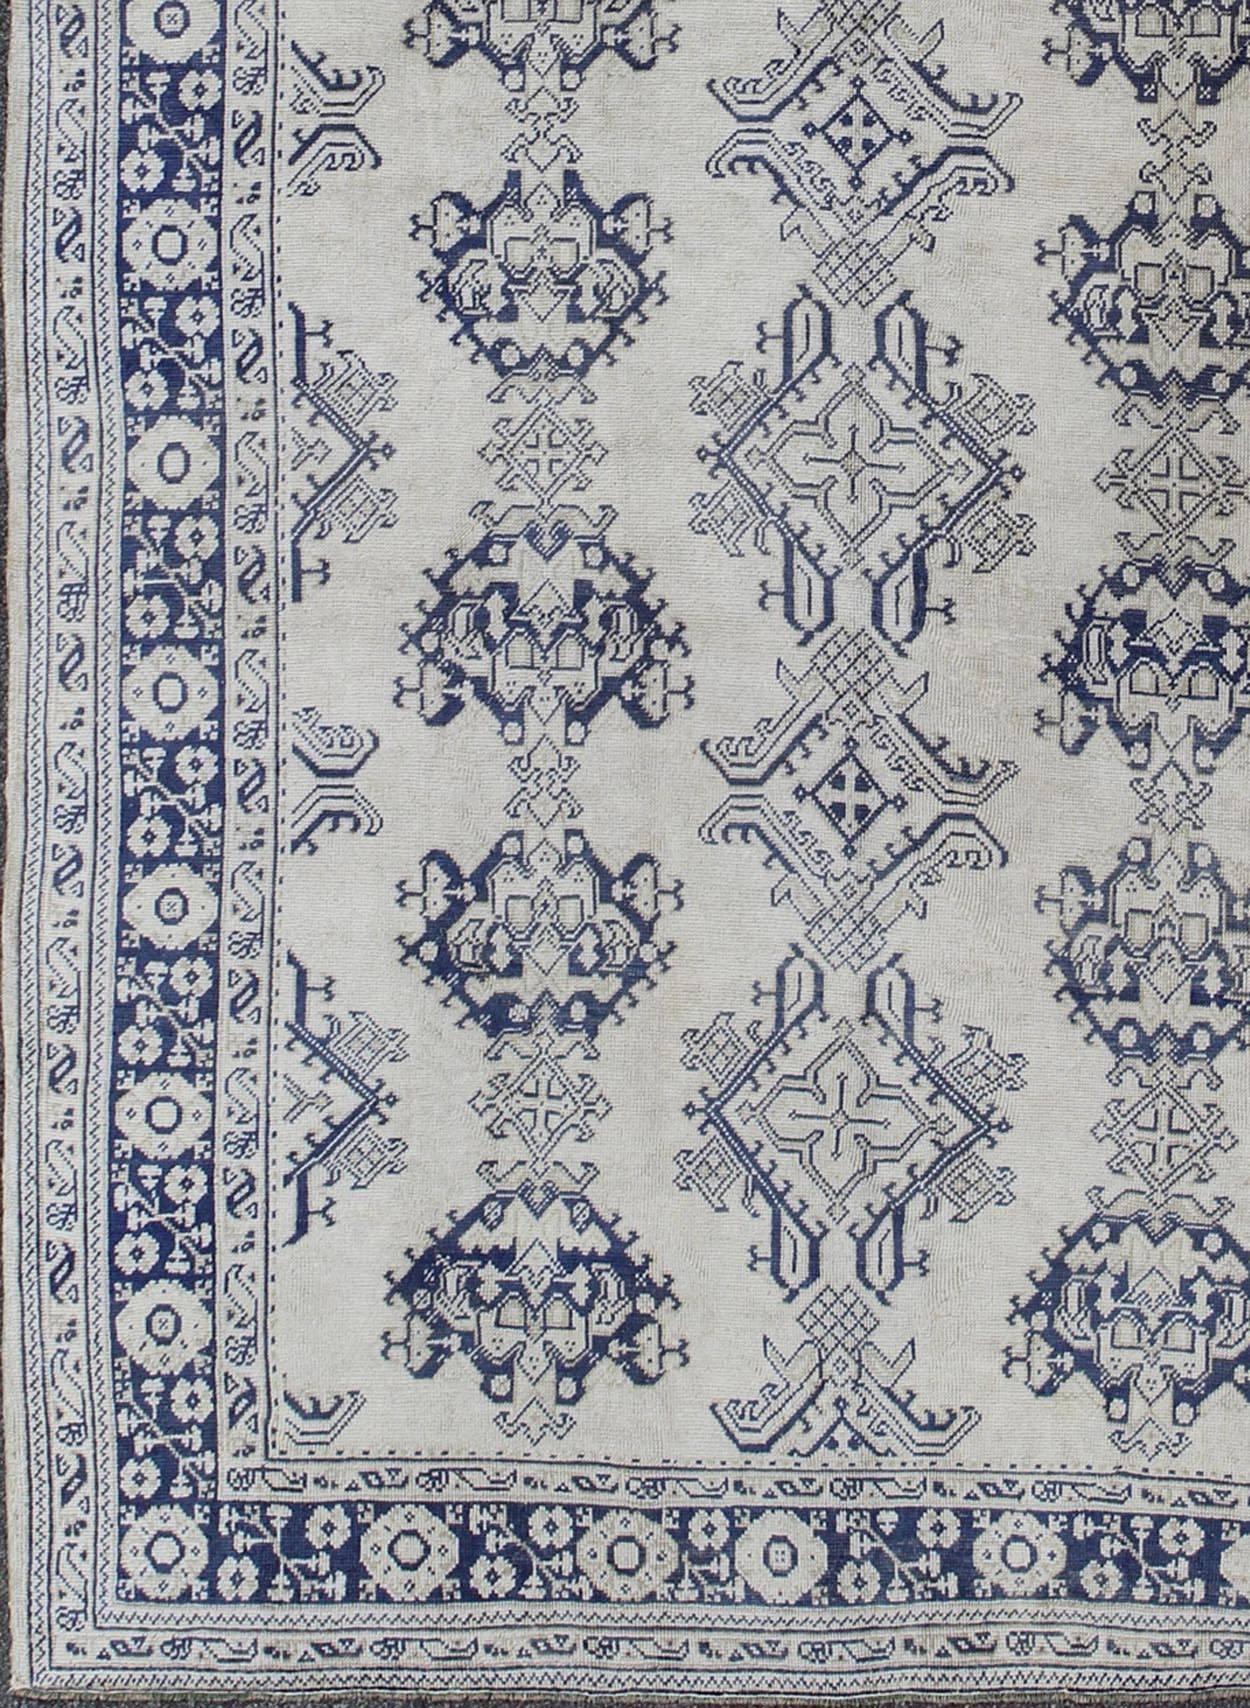 Navy blue and ivory antique Turkish Oushak rug with vertical Geometric Design. Keivan Woven Arts / rug en-165161, country of origin type: Turkey Oushak, circa 1920.
Measures: 9'2 x 16'8.
This Oushak carpet (circa early 20th century) features an